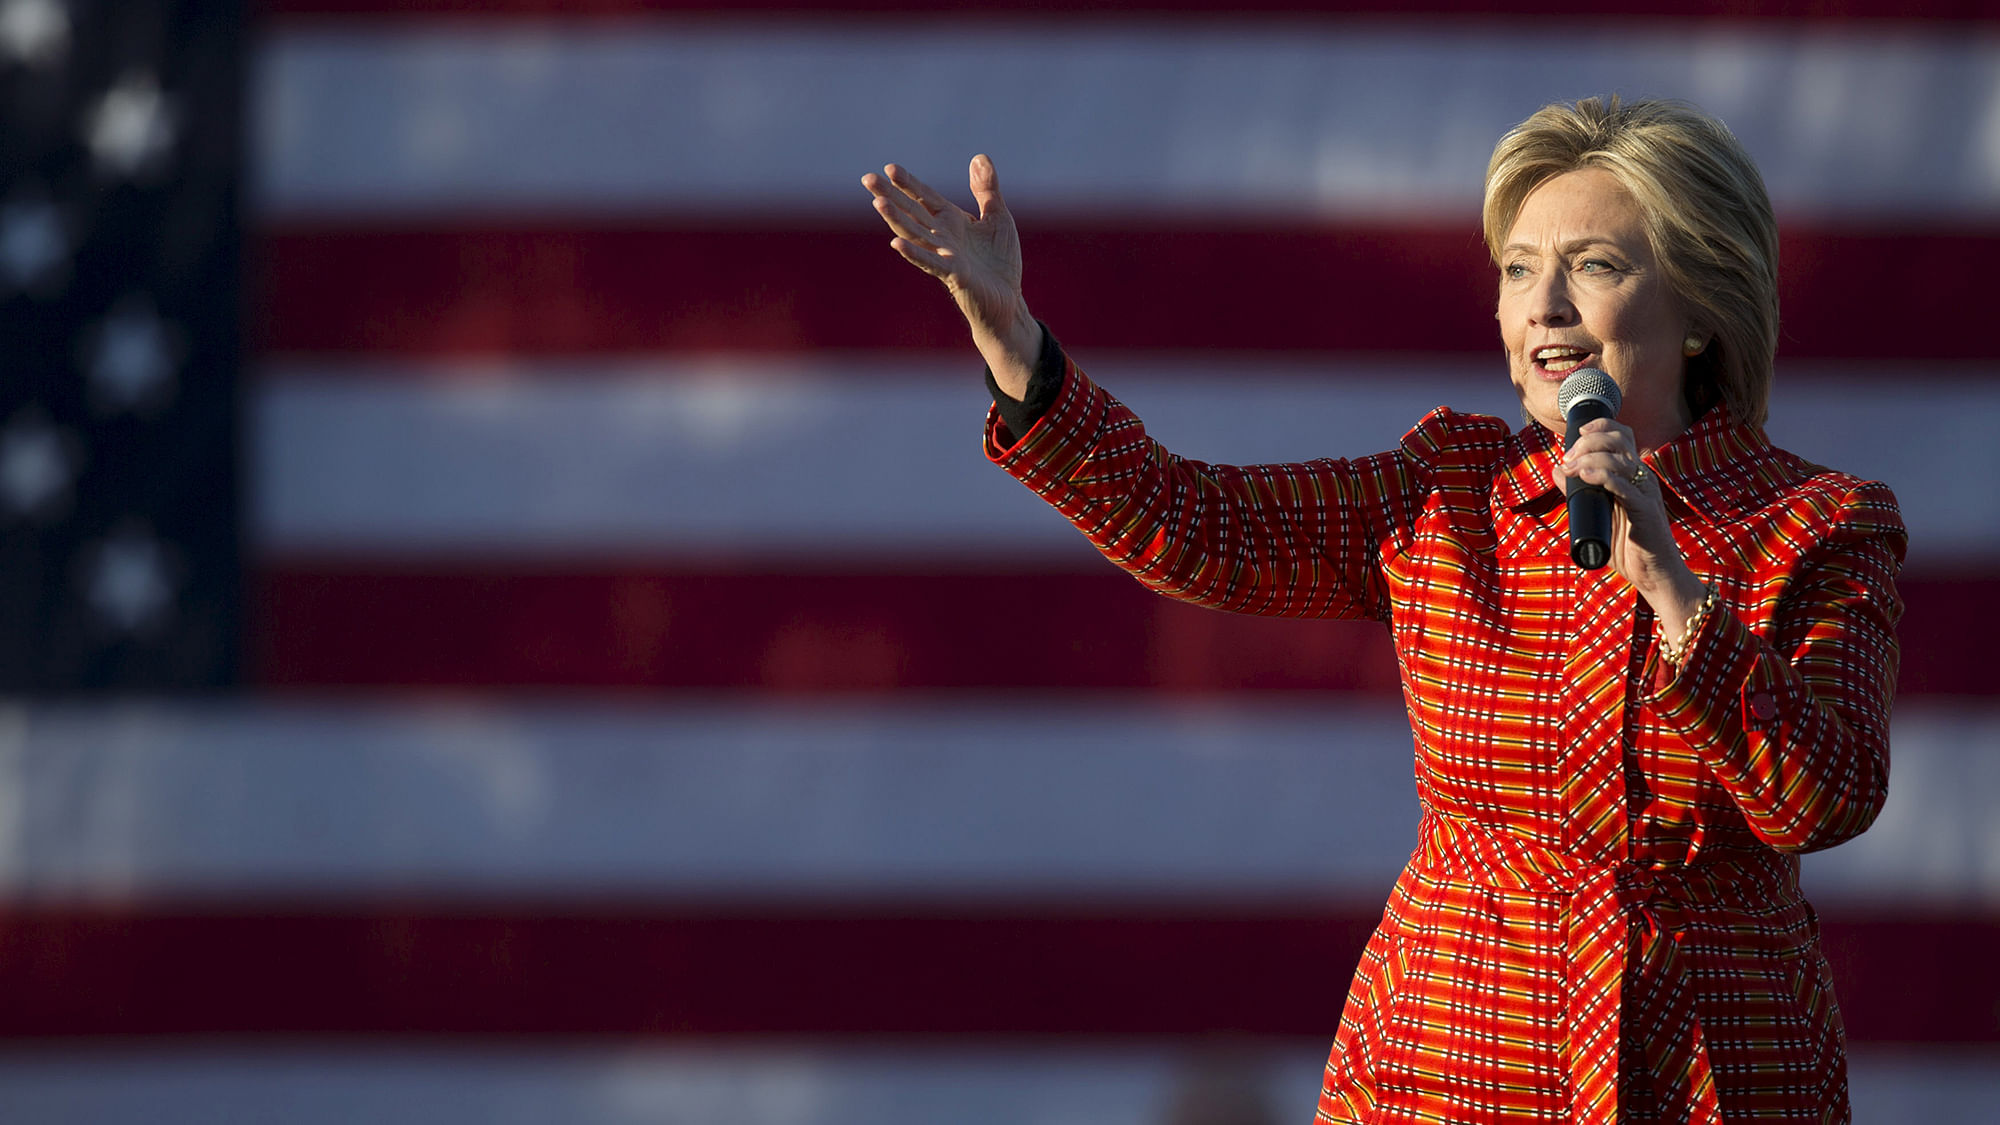 Democratic presidential candidate Hillary Clinton speaks during a campaign rally. (Photo: Reuters)